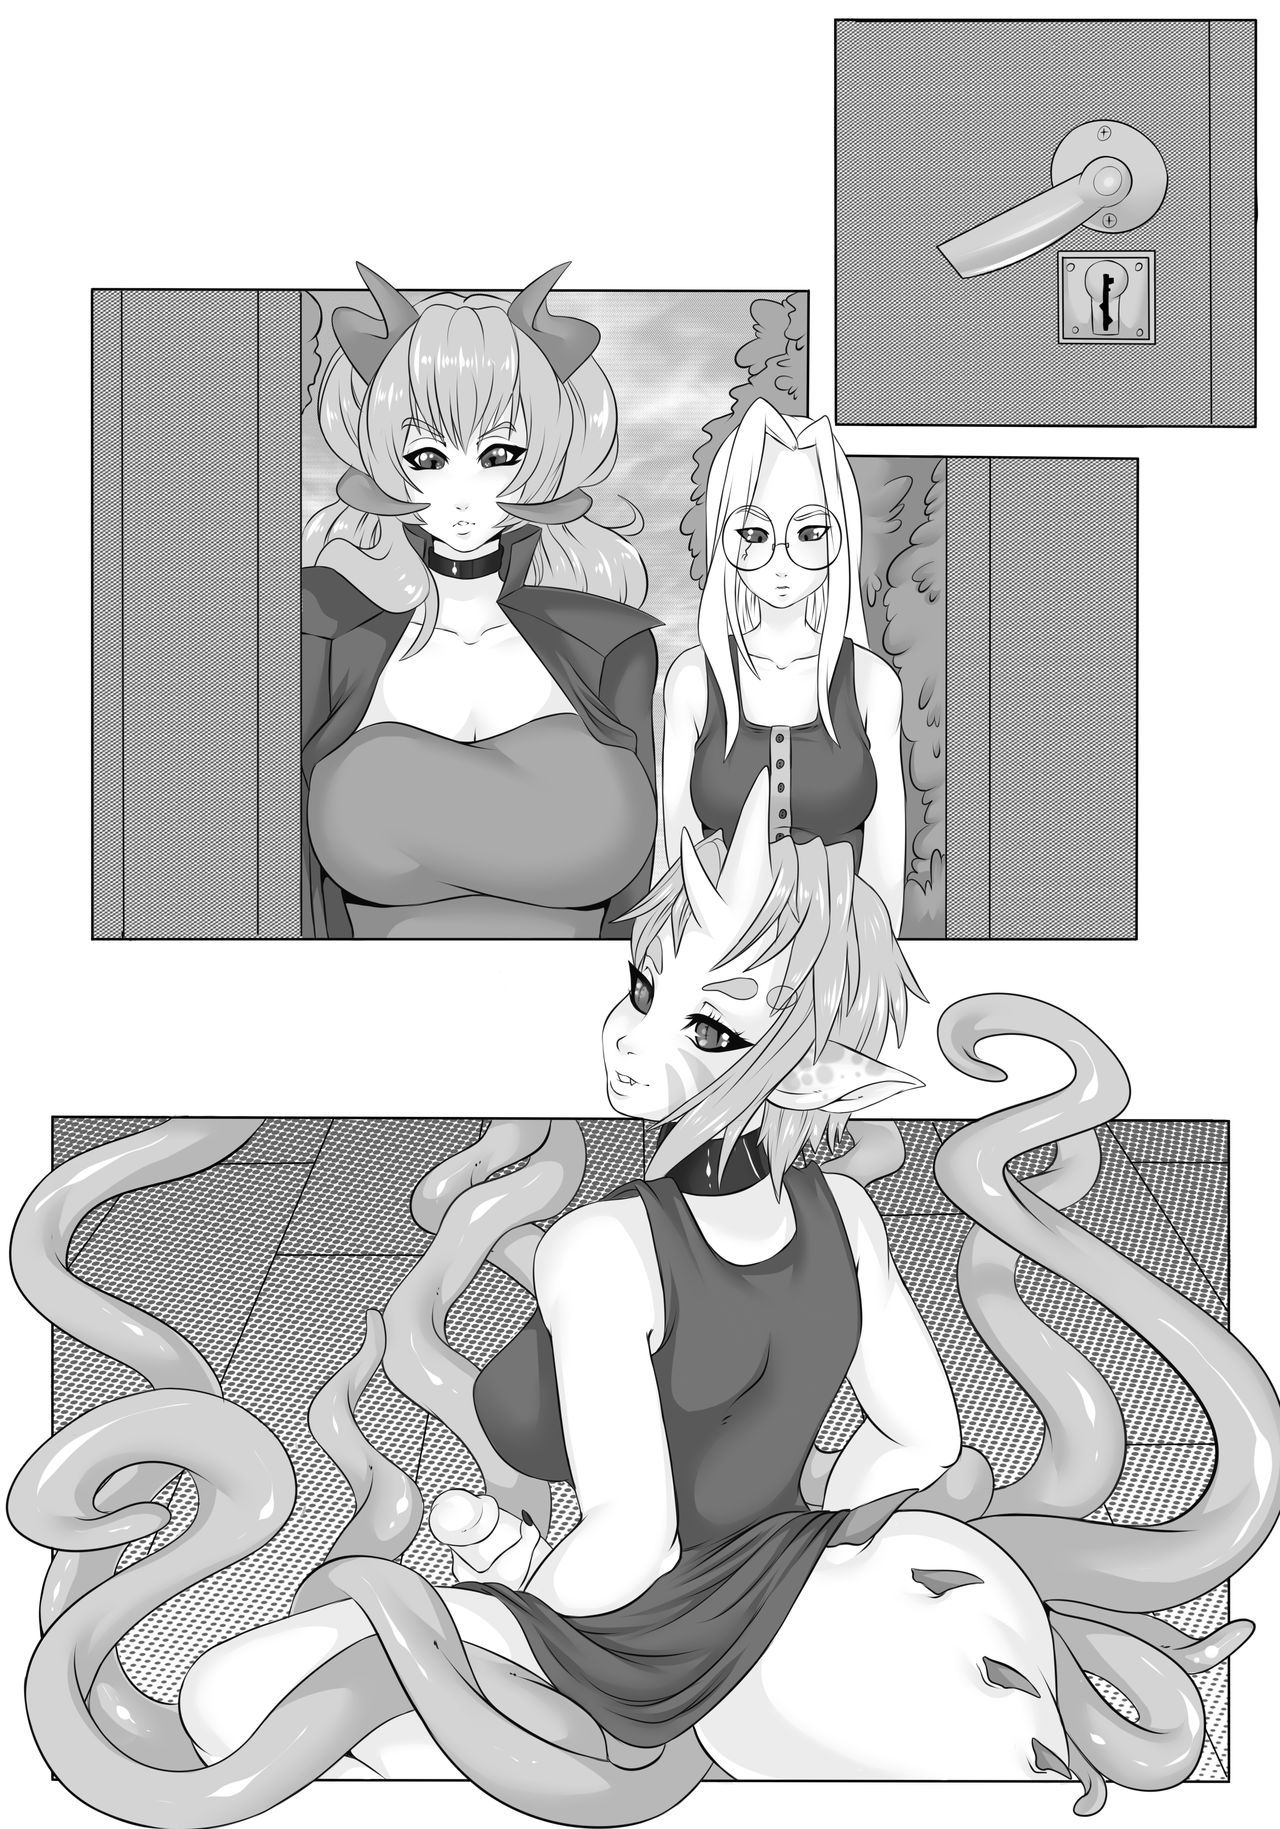 [Babayana] How 01 Met the Rest of Her New Family 5